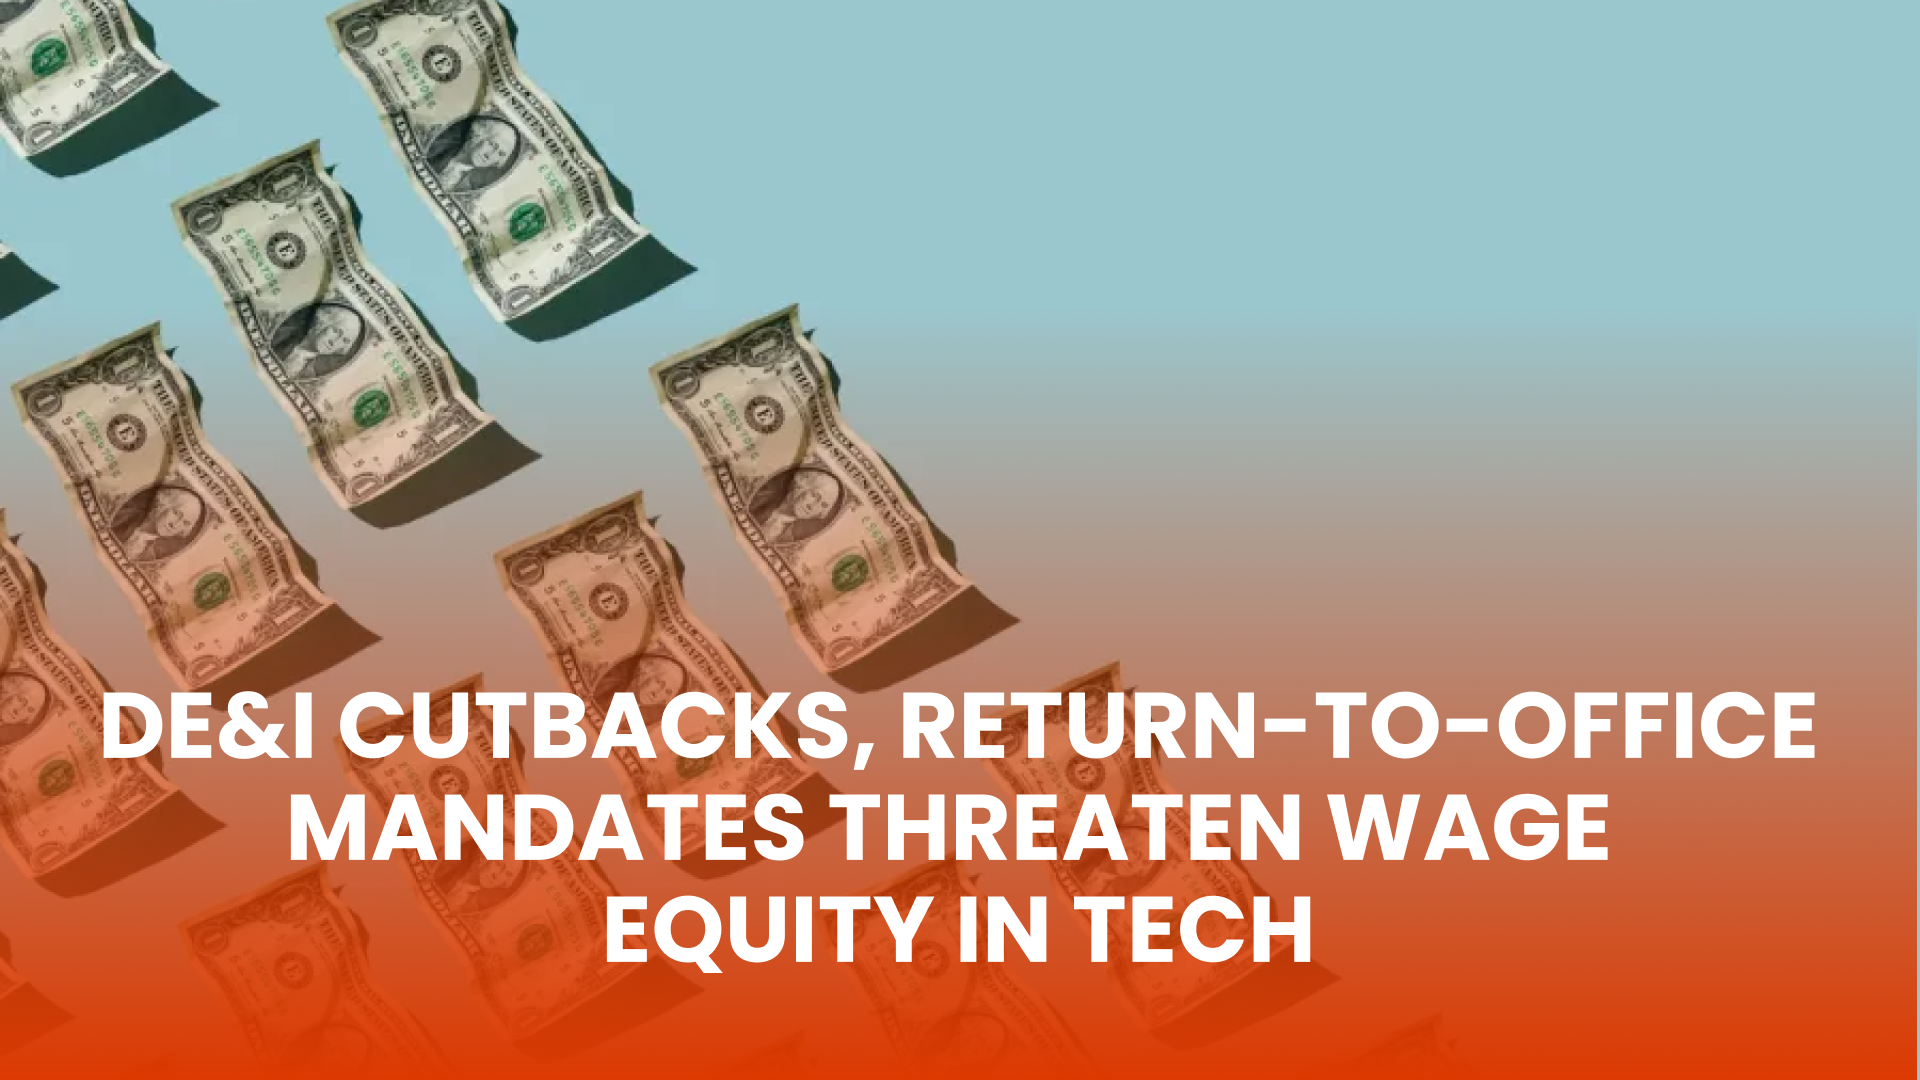 diversity, equity, and inclusion, tech, wage gap, DE&I cutbacks, return-to-office mandates